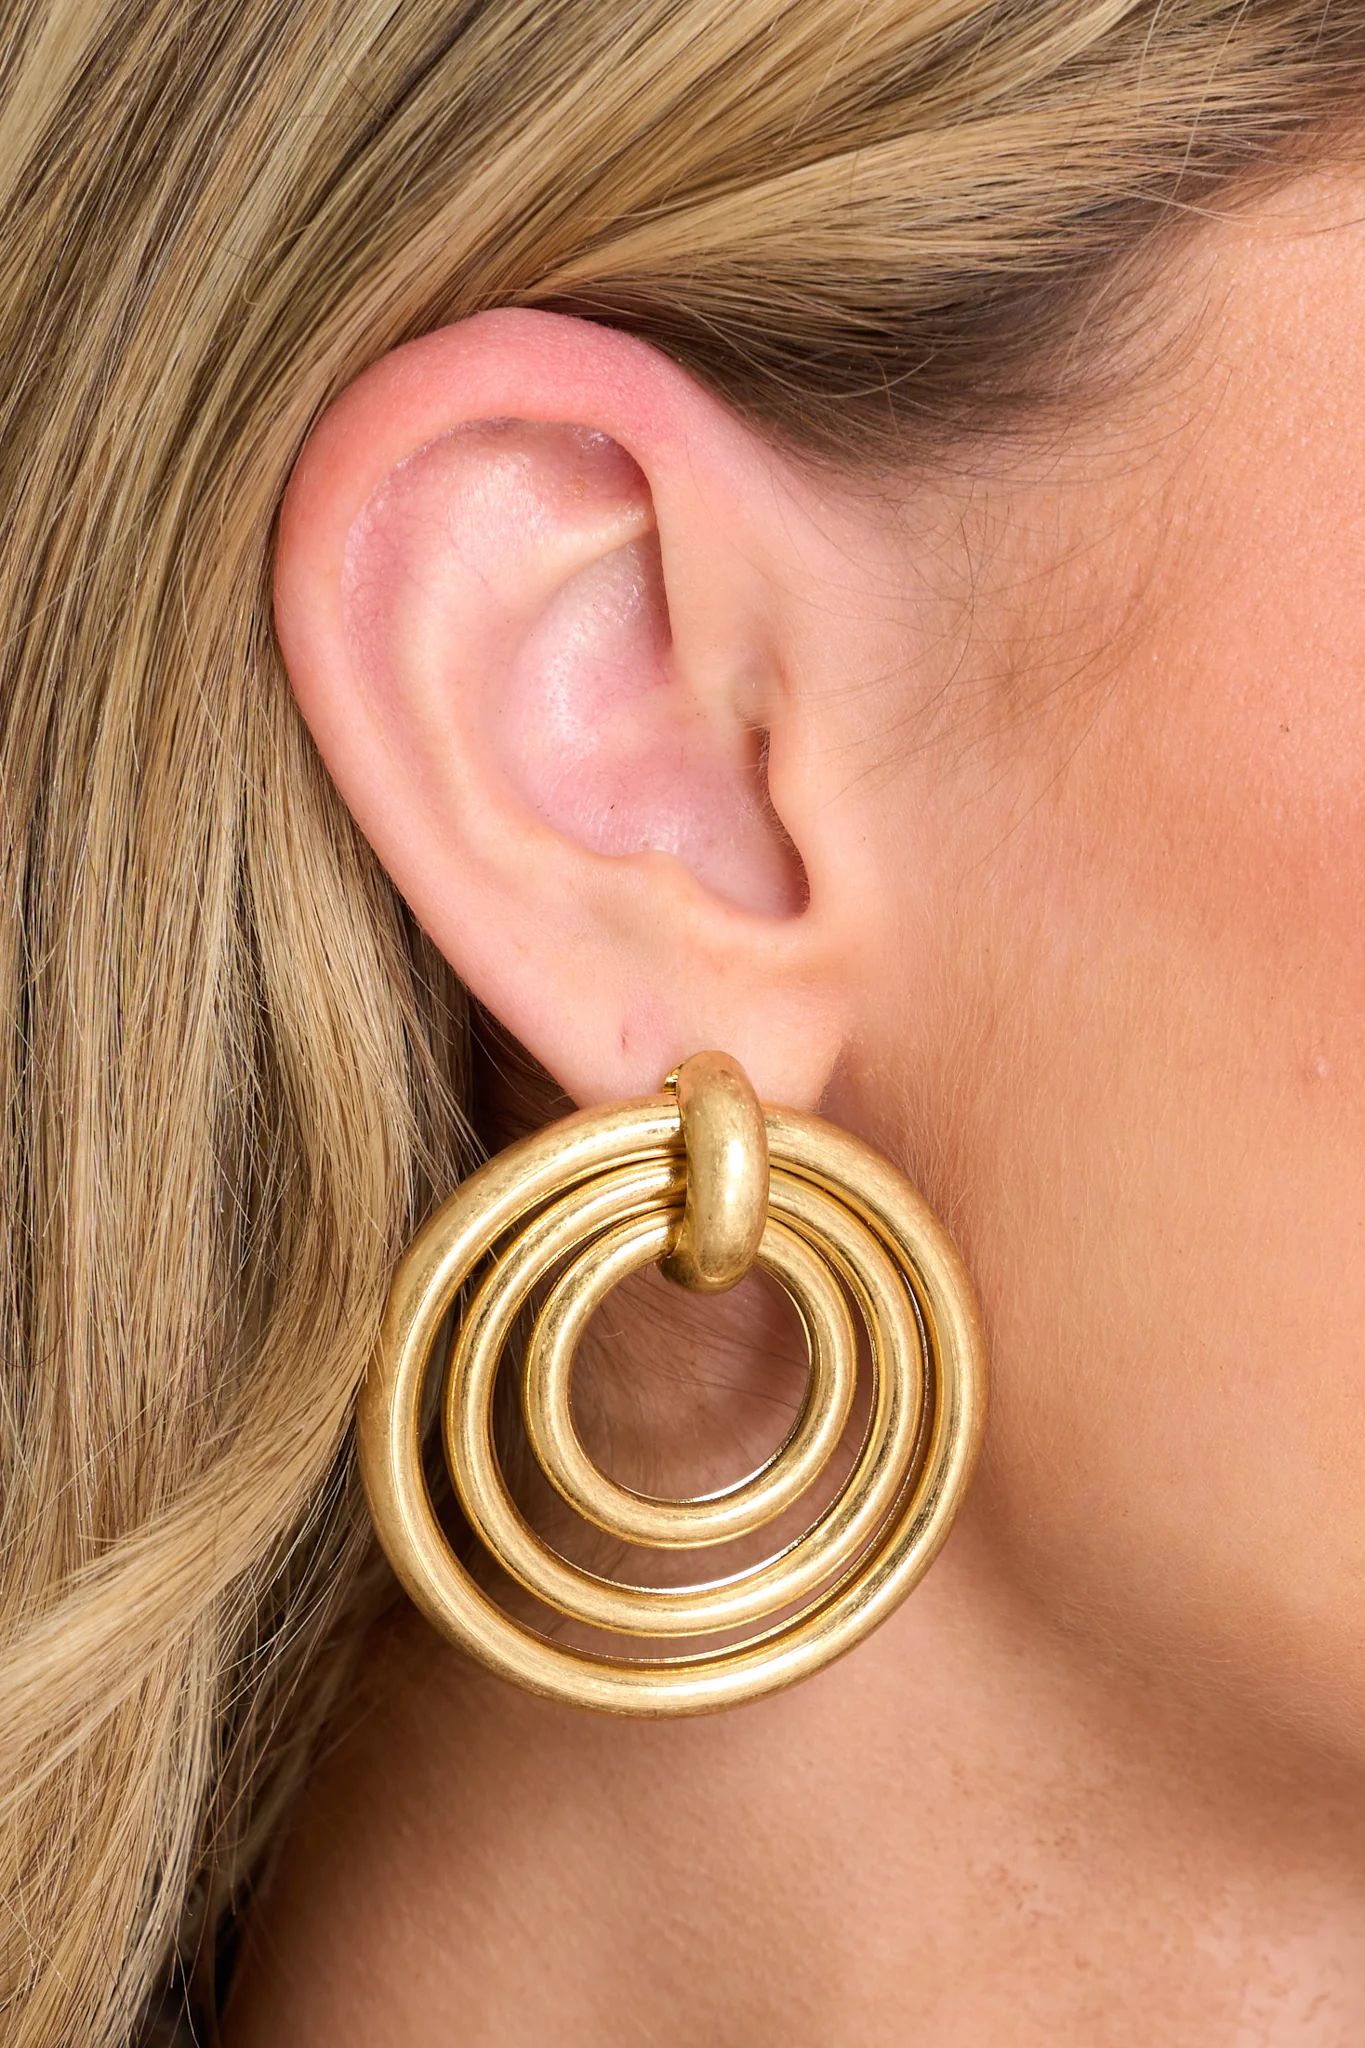 Come Around To You Worn Gold Earrings | Red Dress 